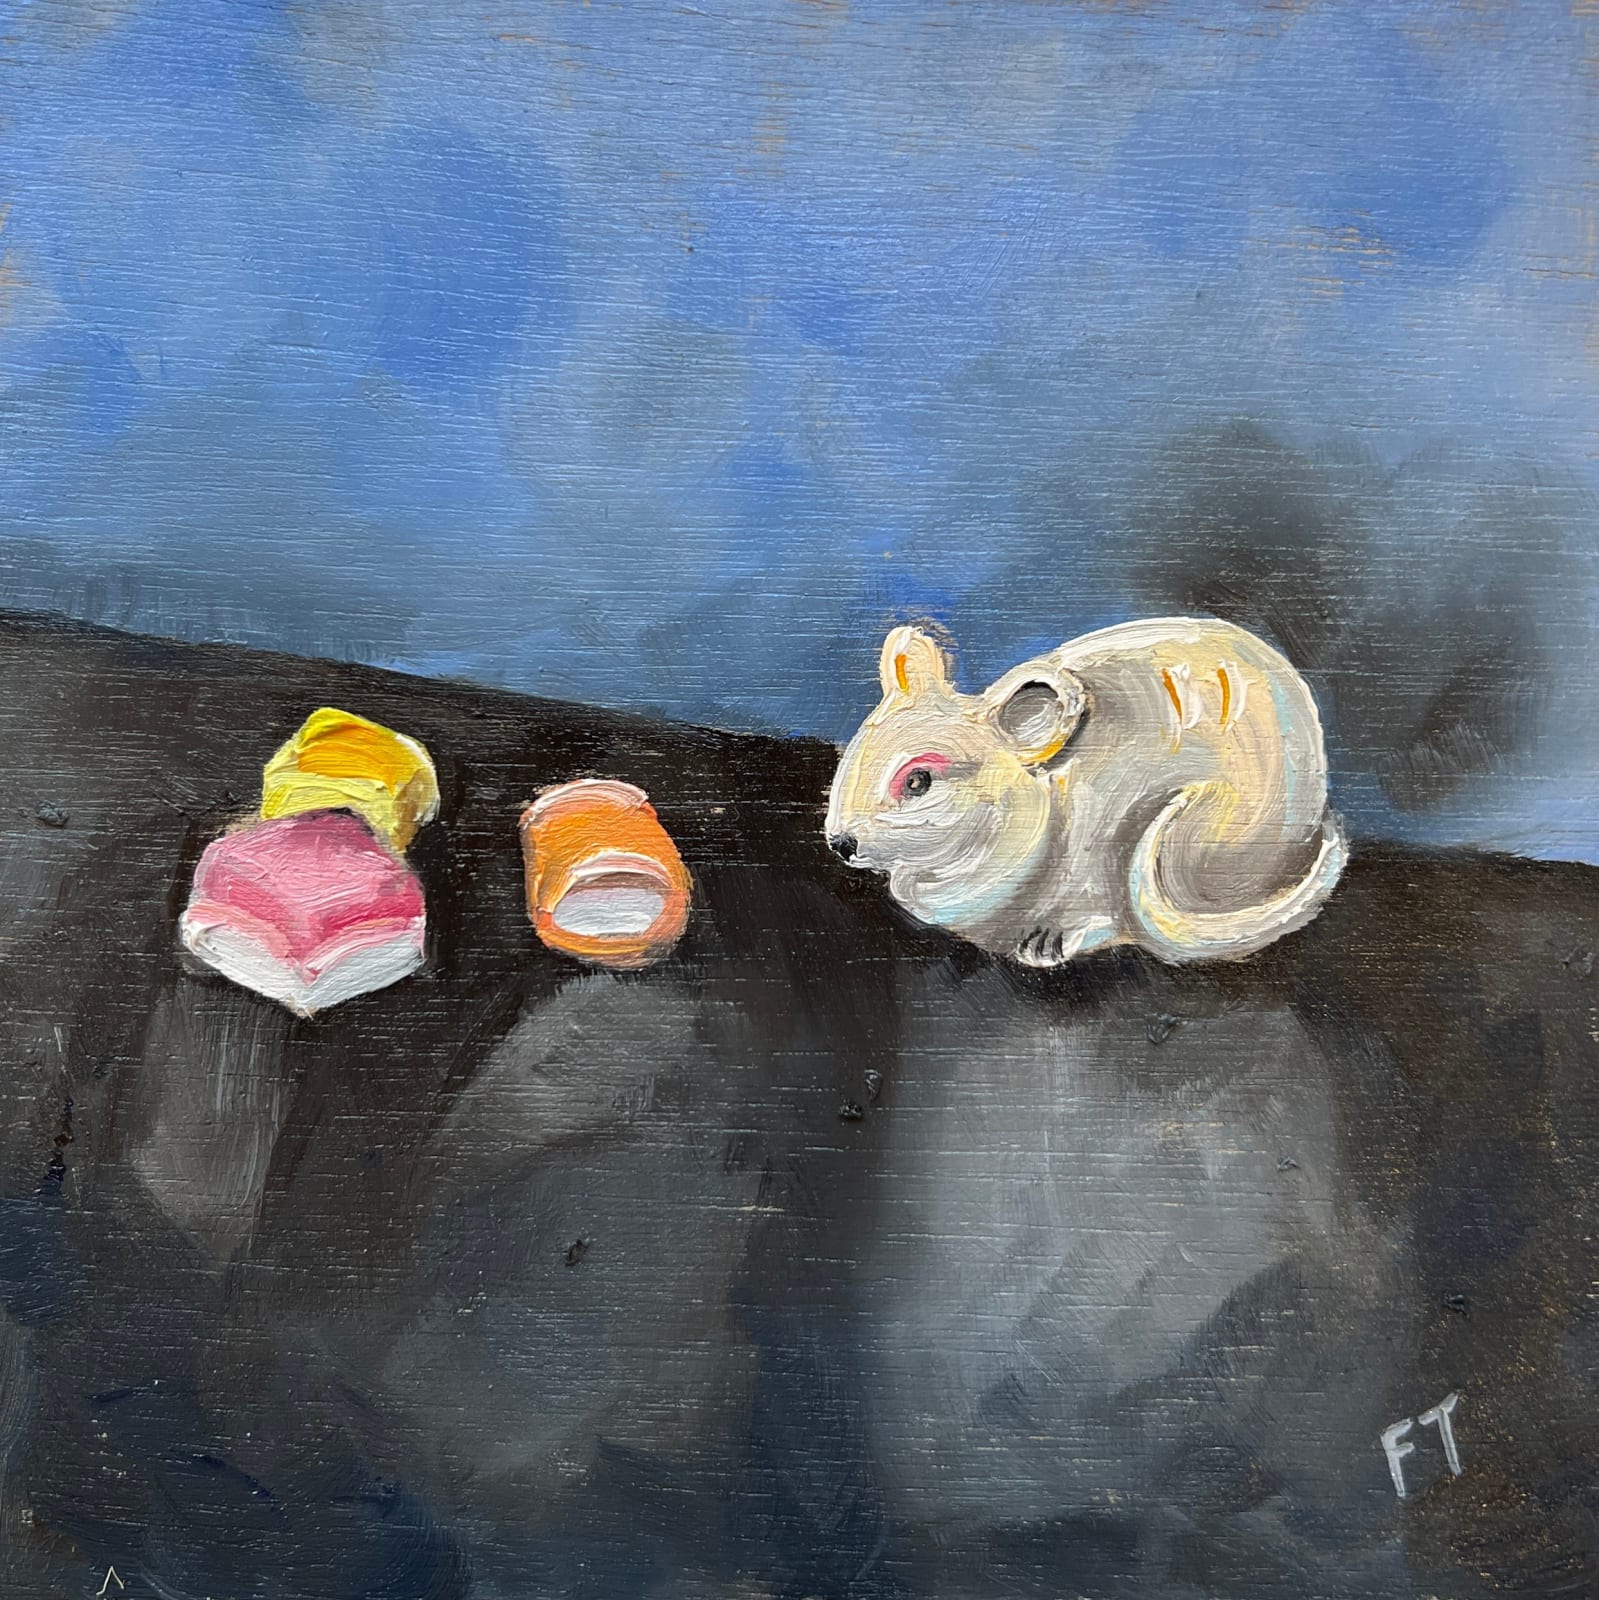 Fiona Thomson, China Mouse with Dolly Mixtures